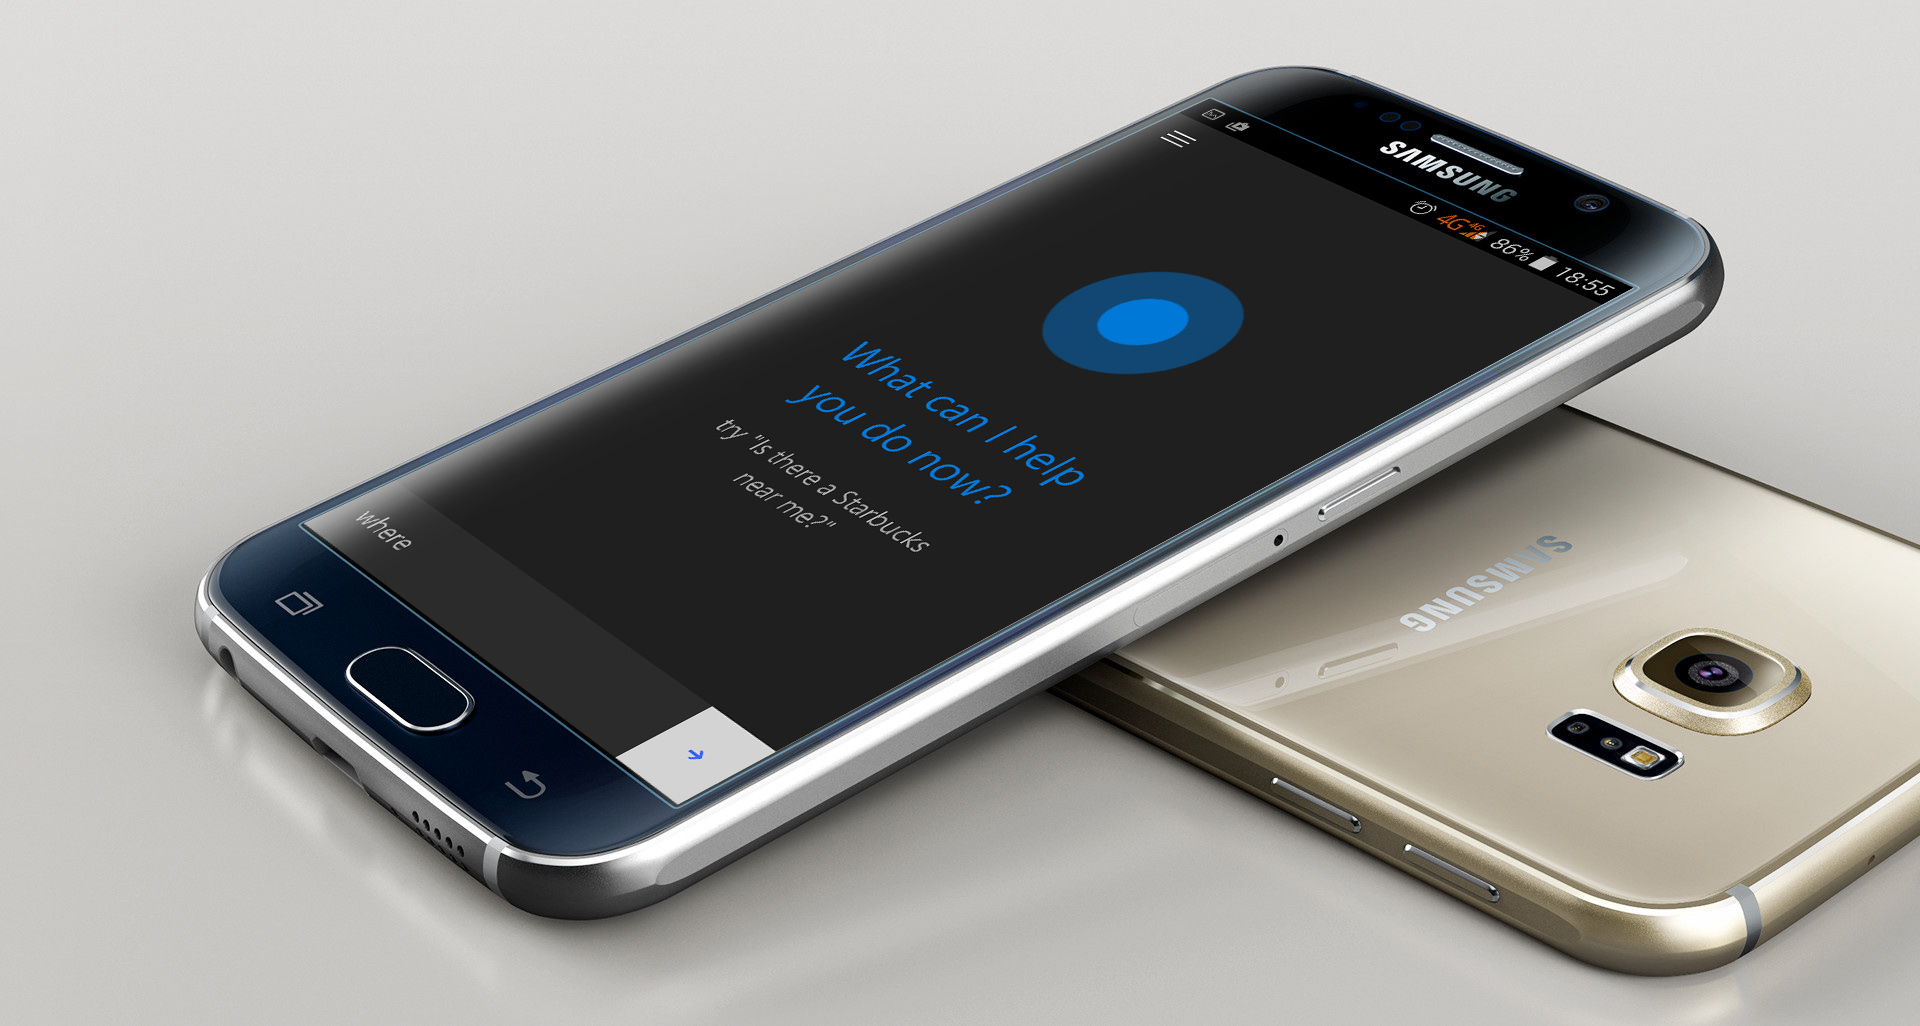 Cortana for Android APK